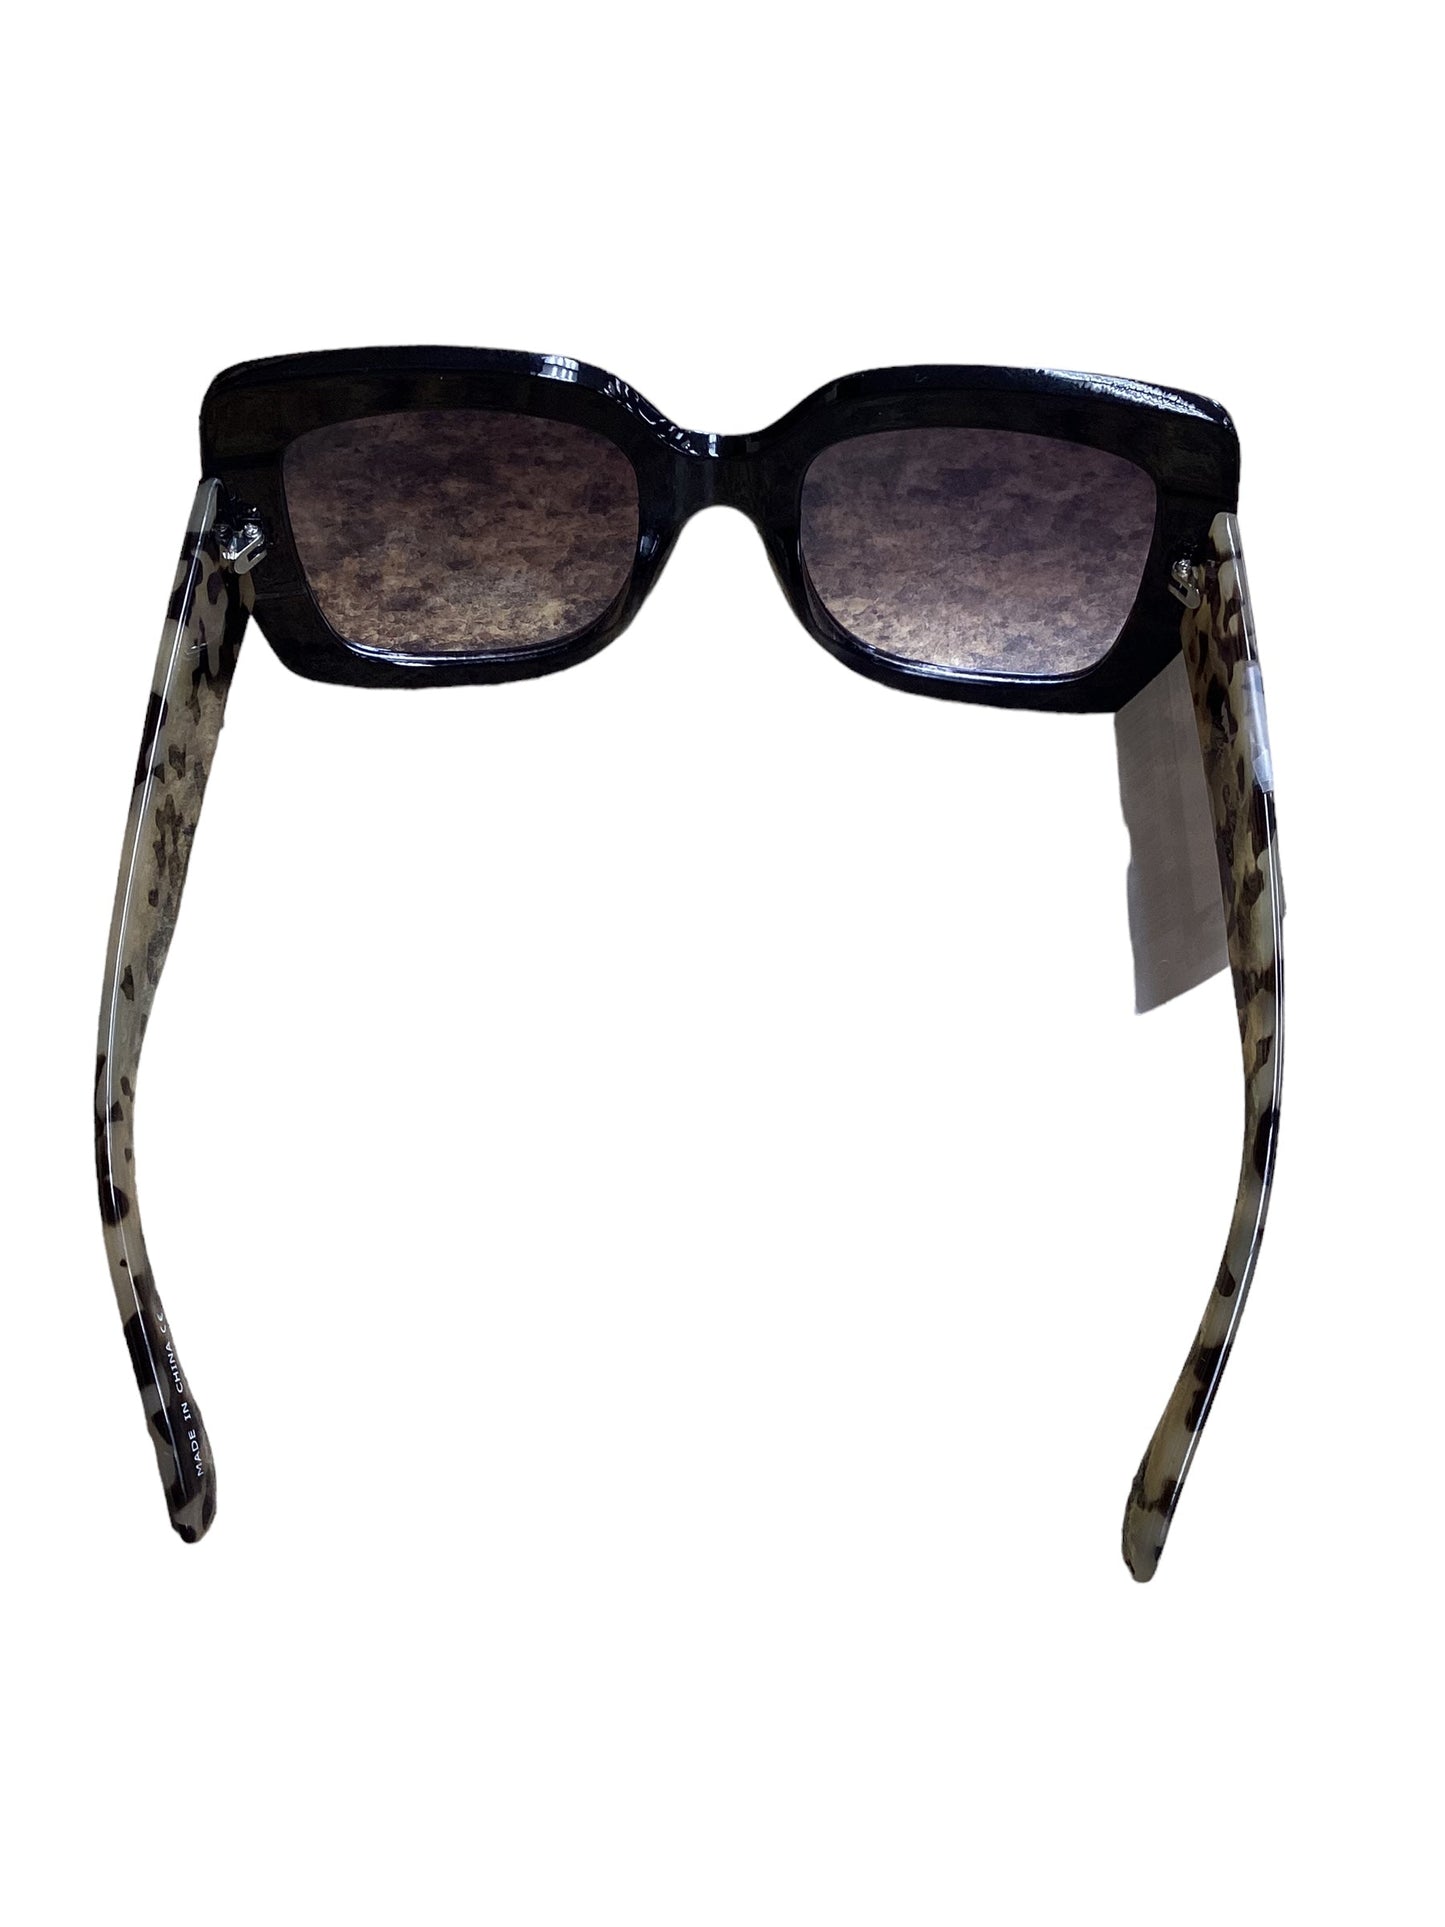 Sunglasses By Free People